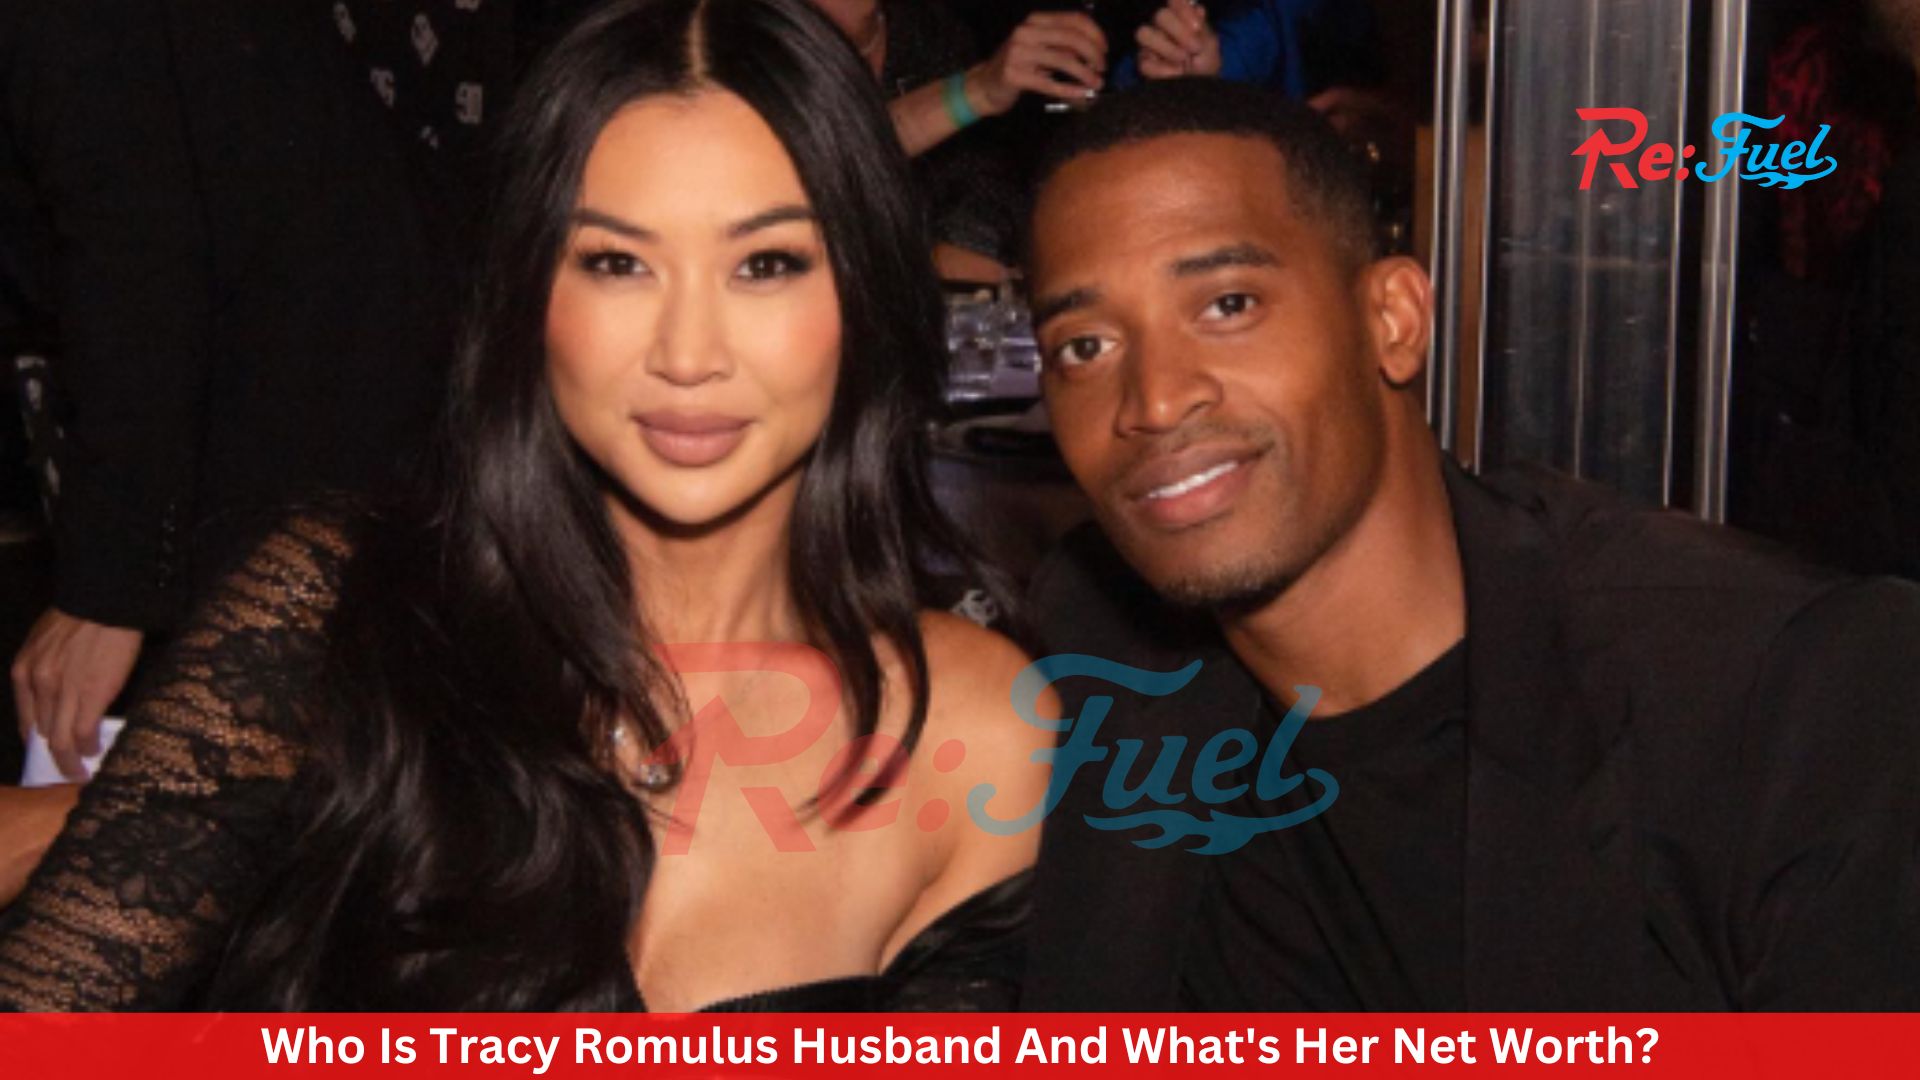 Who Is Tracy Romulus Husband And What's Her Net Worth?